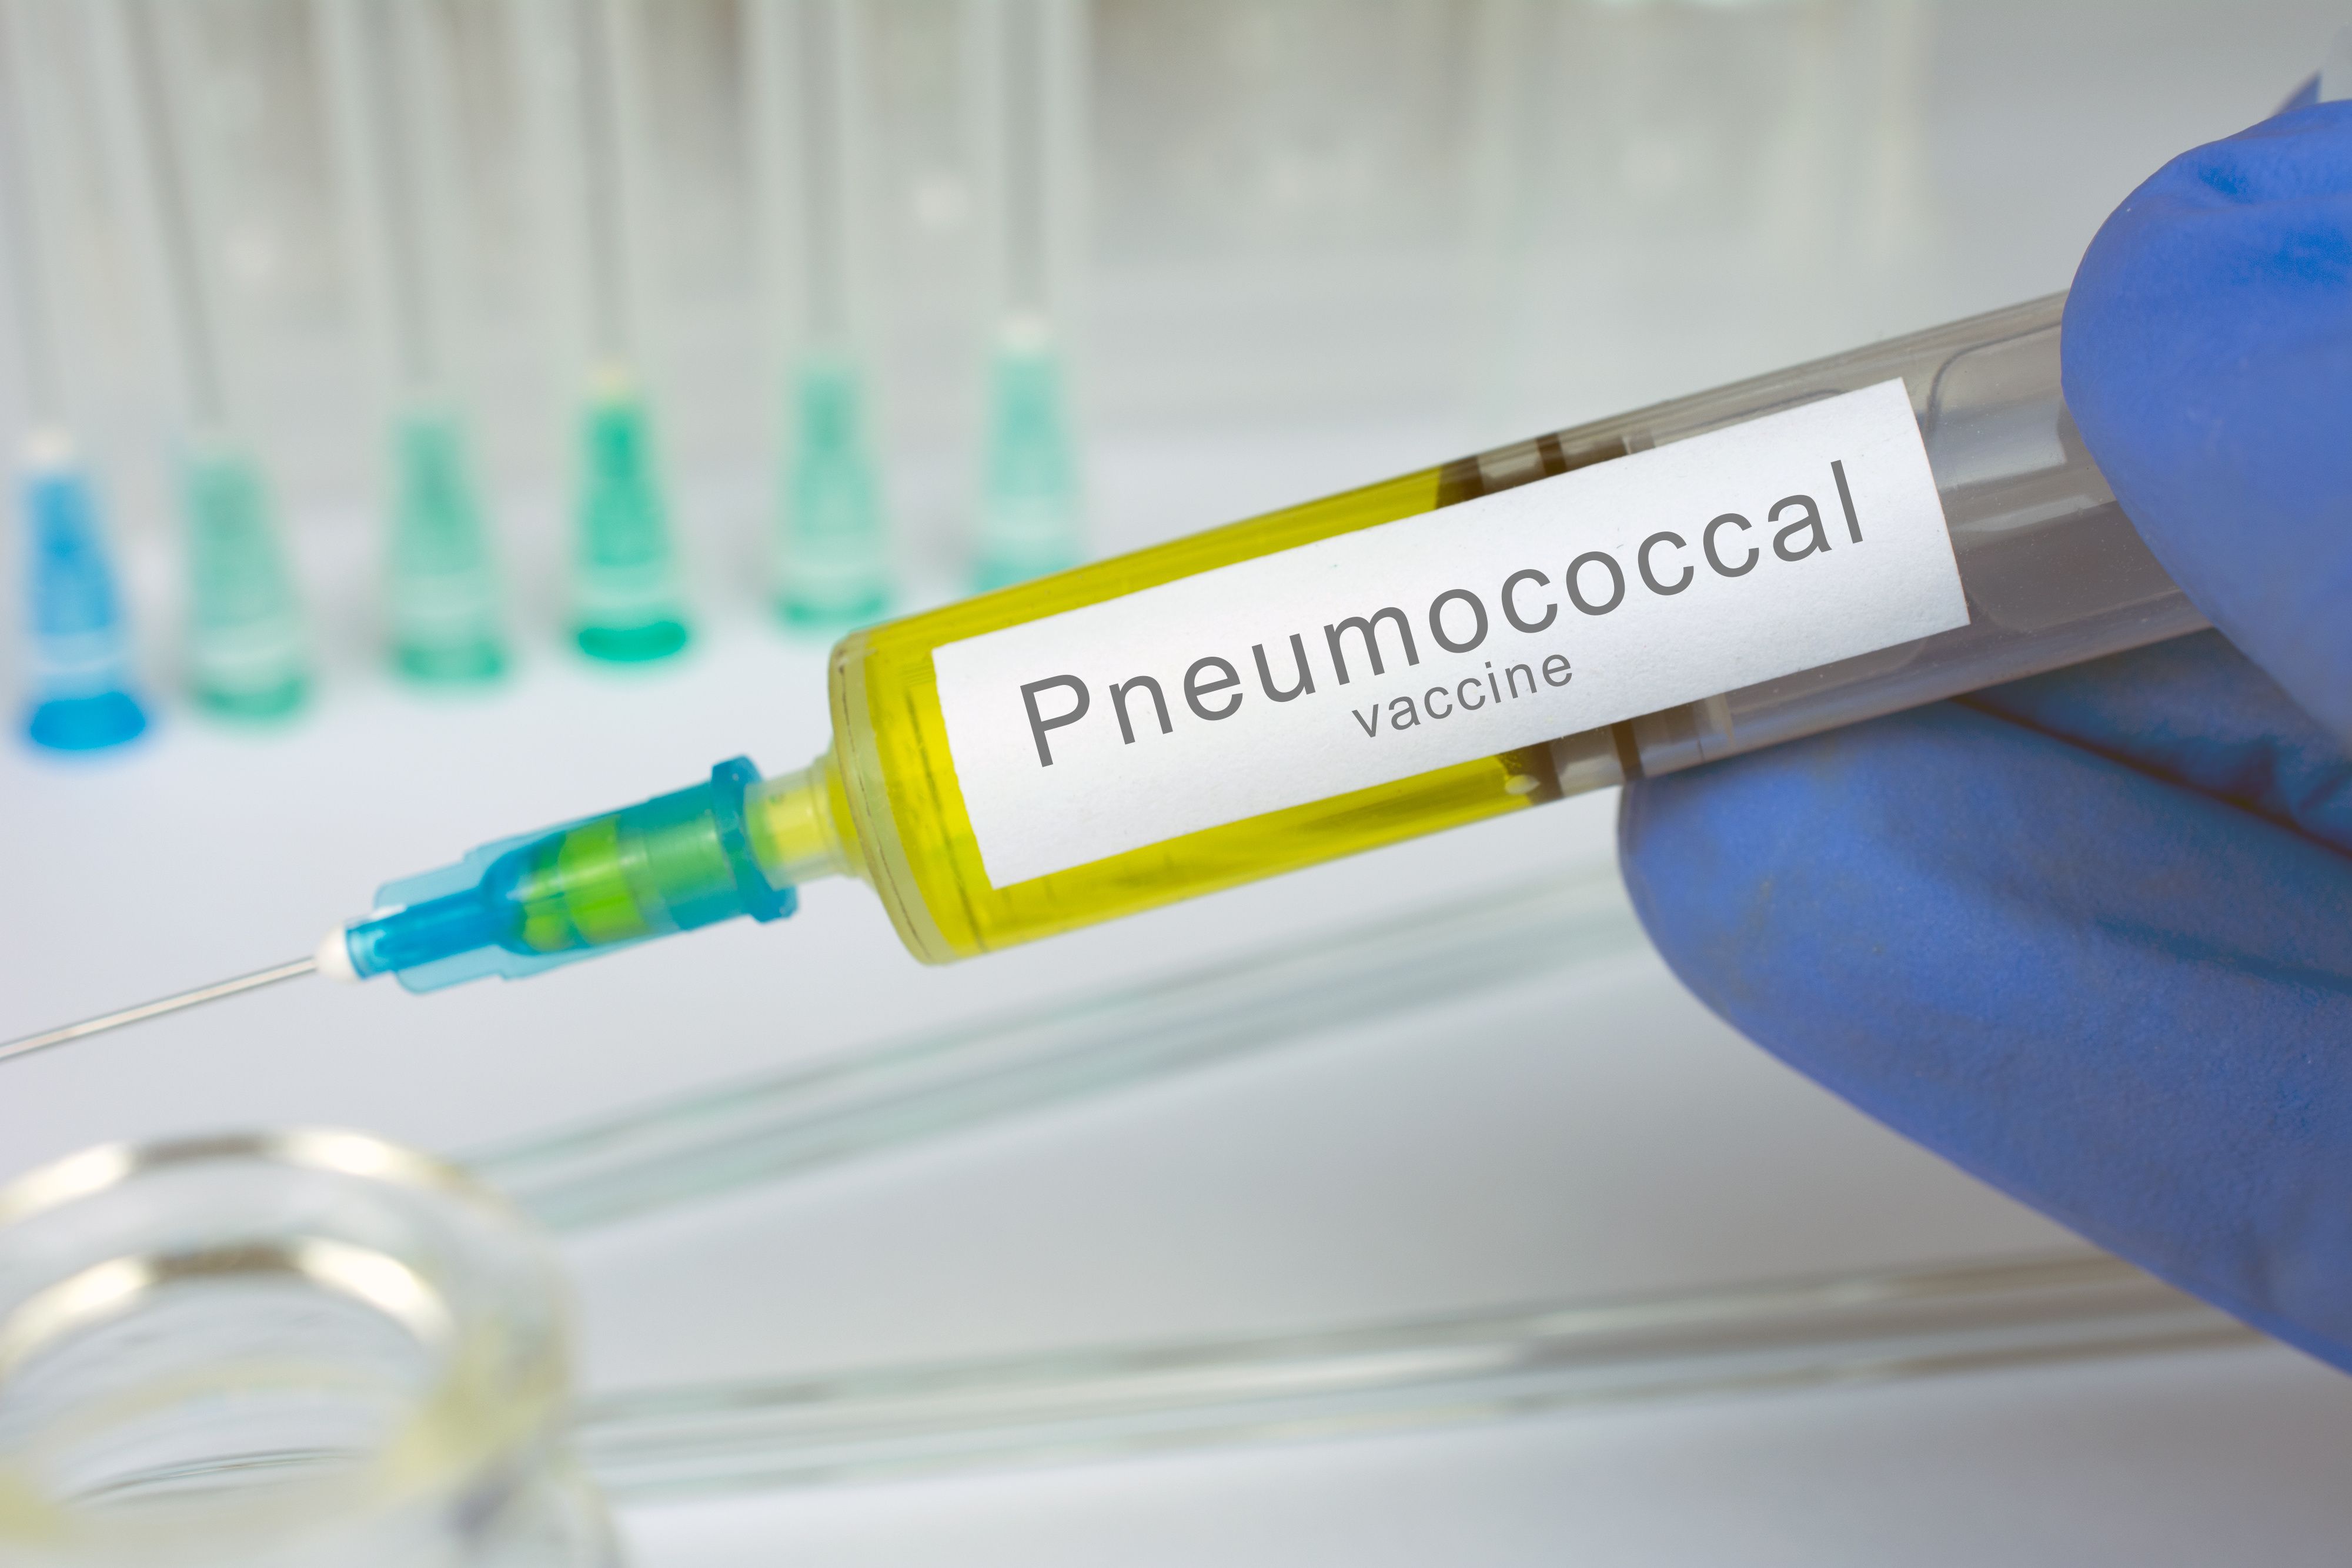 thesis on pneumococcal vaccine